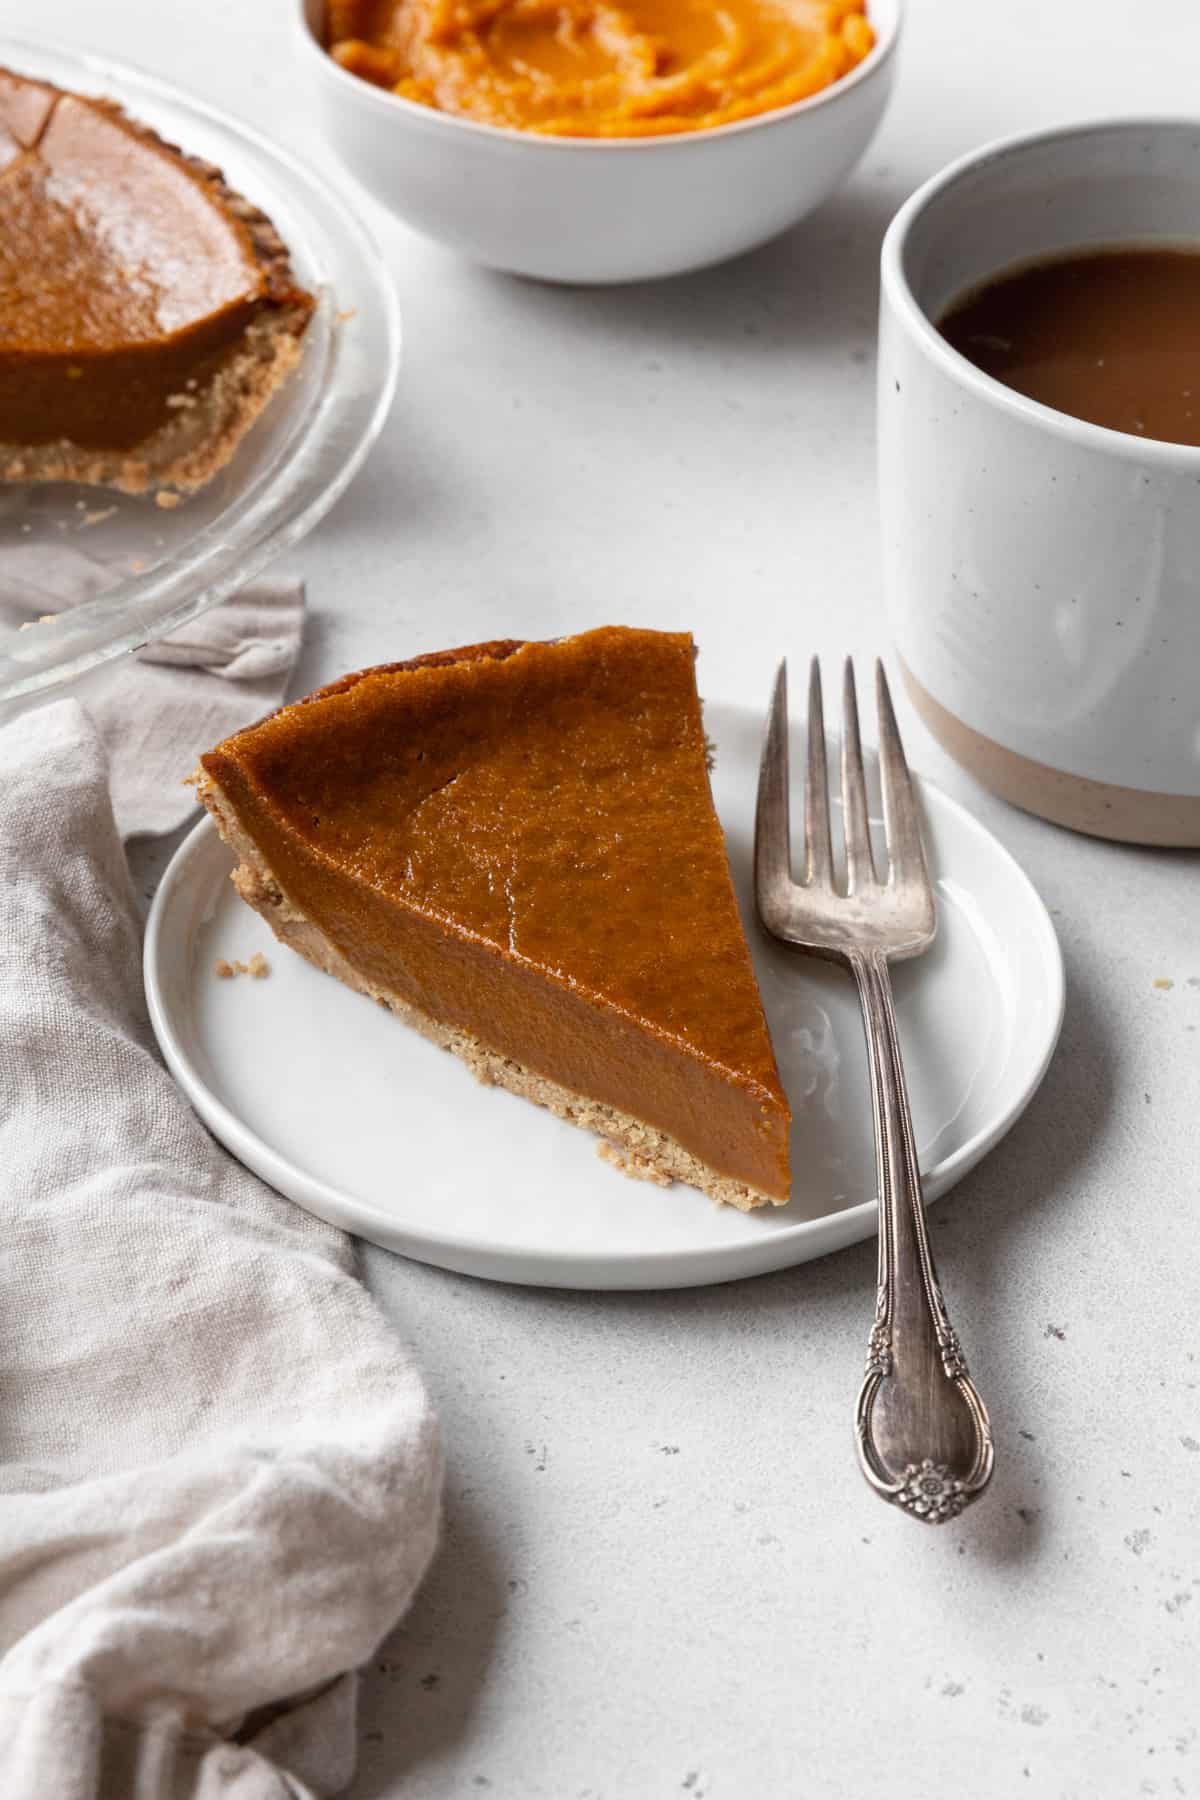 A slice of eggless pumpkin pie on a white dessert plate with a silver spoon, with a mug of coffee in the background.